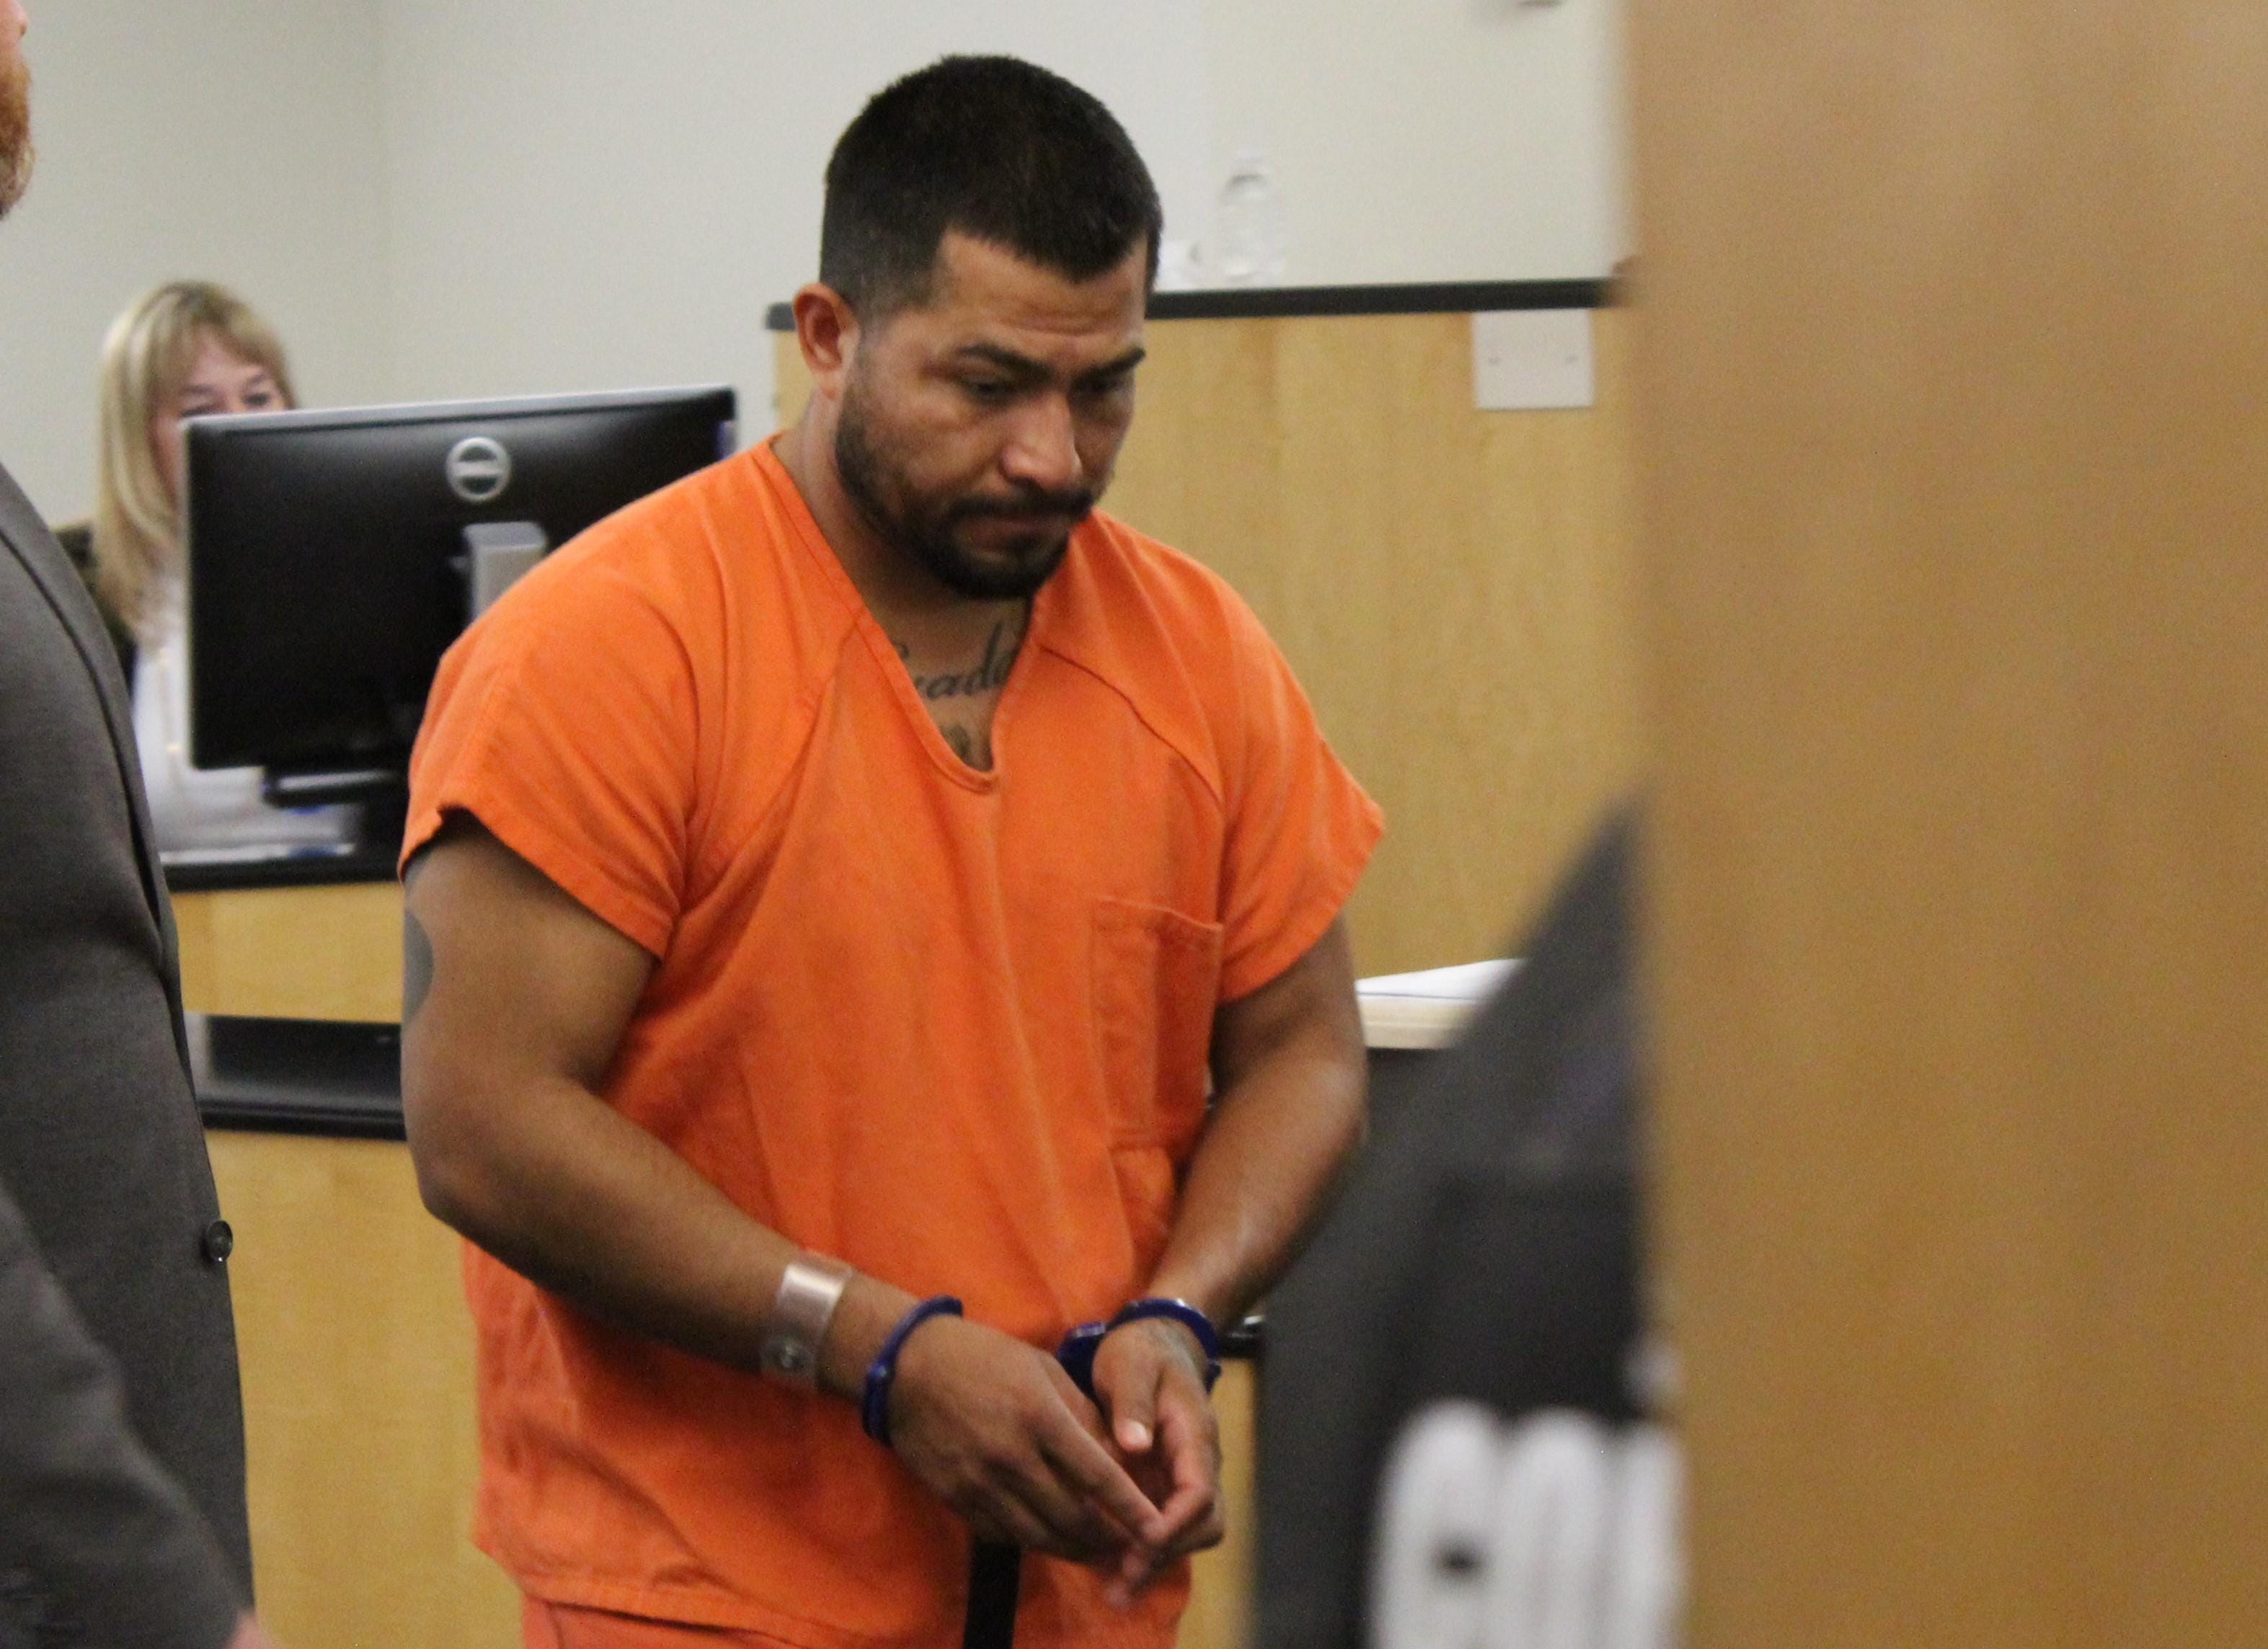 Juan Luis Alvarado-Velazquez, 32, appears in Clark County Superior Court Thursday on suspicion of first-degree attempted murder, a charge stemming from a gang stabbing in Vancouver in 2007. Alvarado-Velazquez allegedly fled to Mexico in 2007 and was apprehended at the U.S.-Mexico border earlier this year.